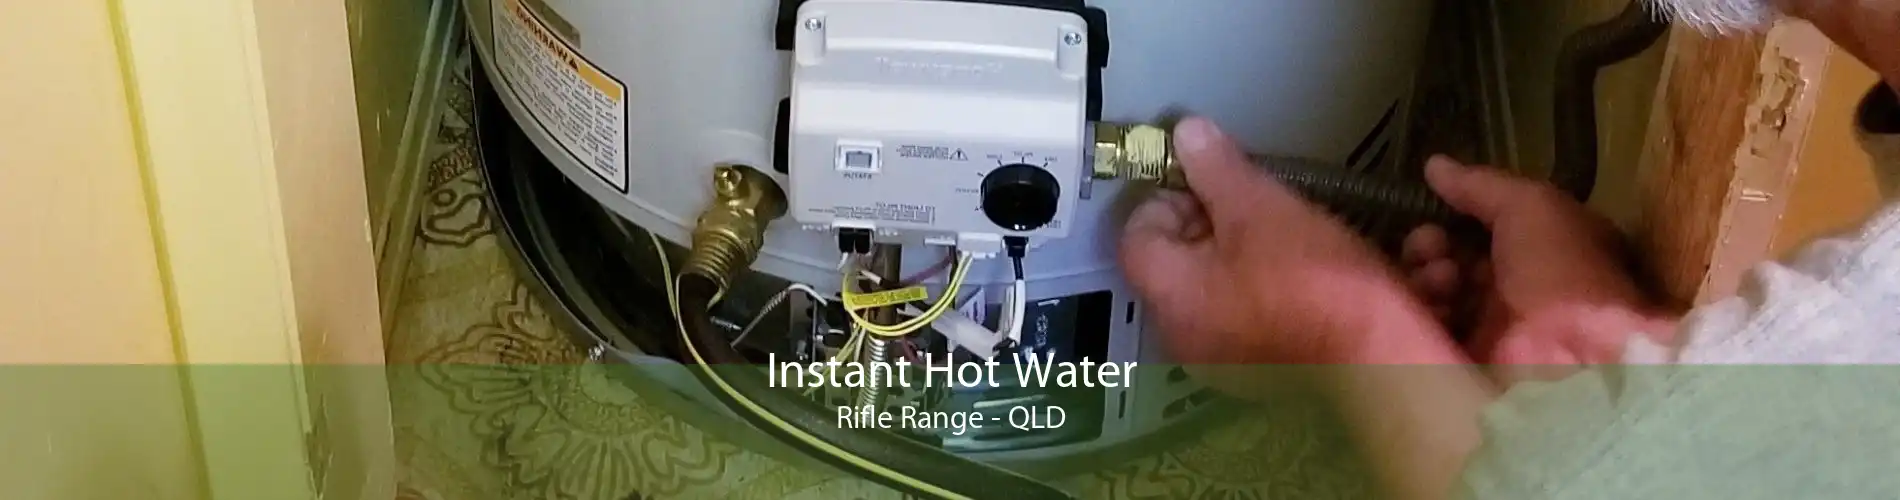 Instant Hot Water Rifle Range - QLD